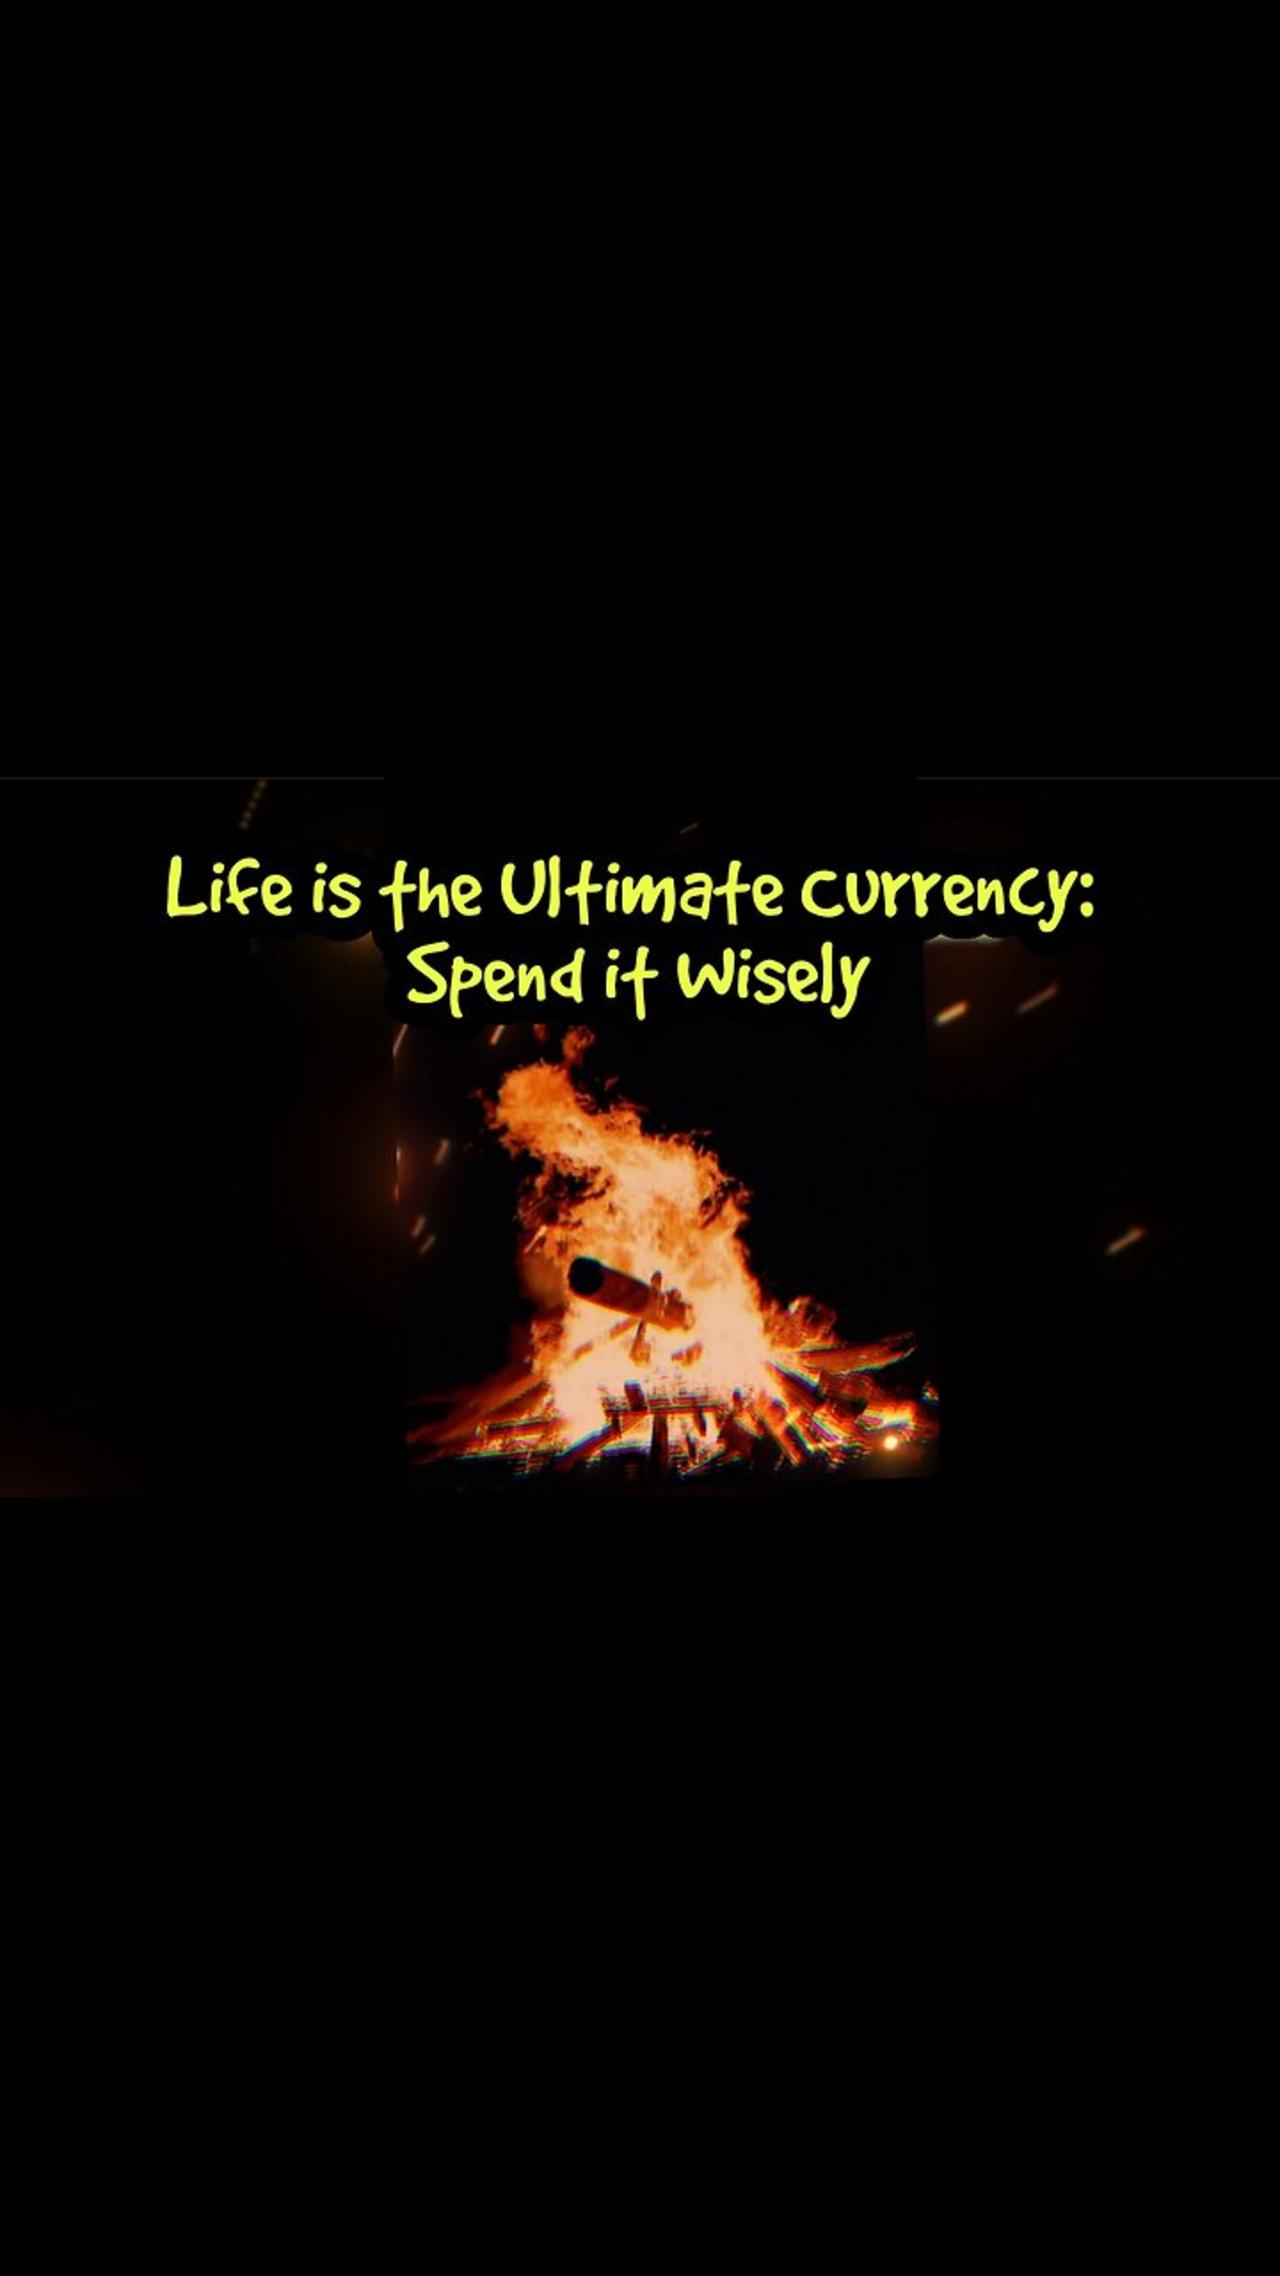 Life is the Ultimate Currency: Spend it Wisely!